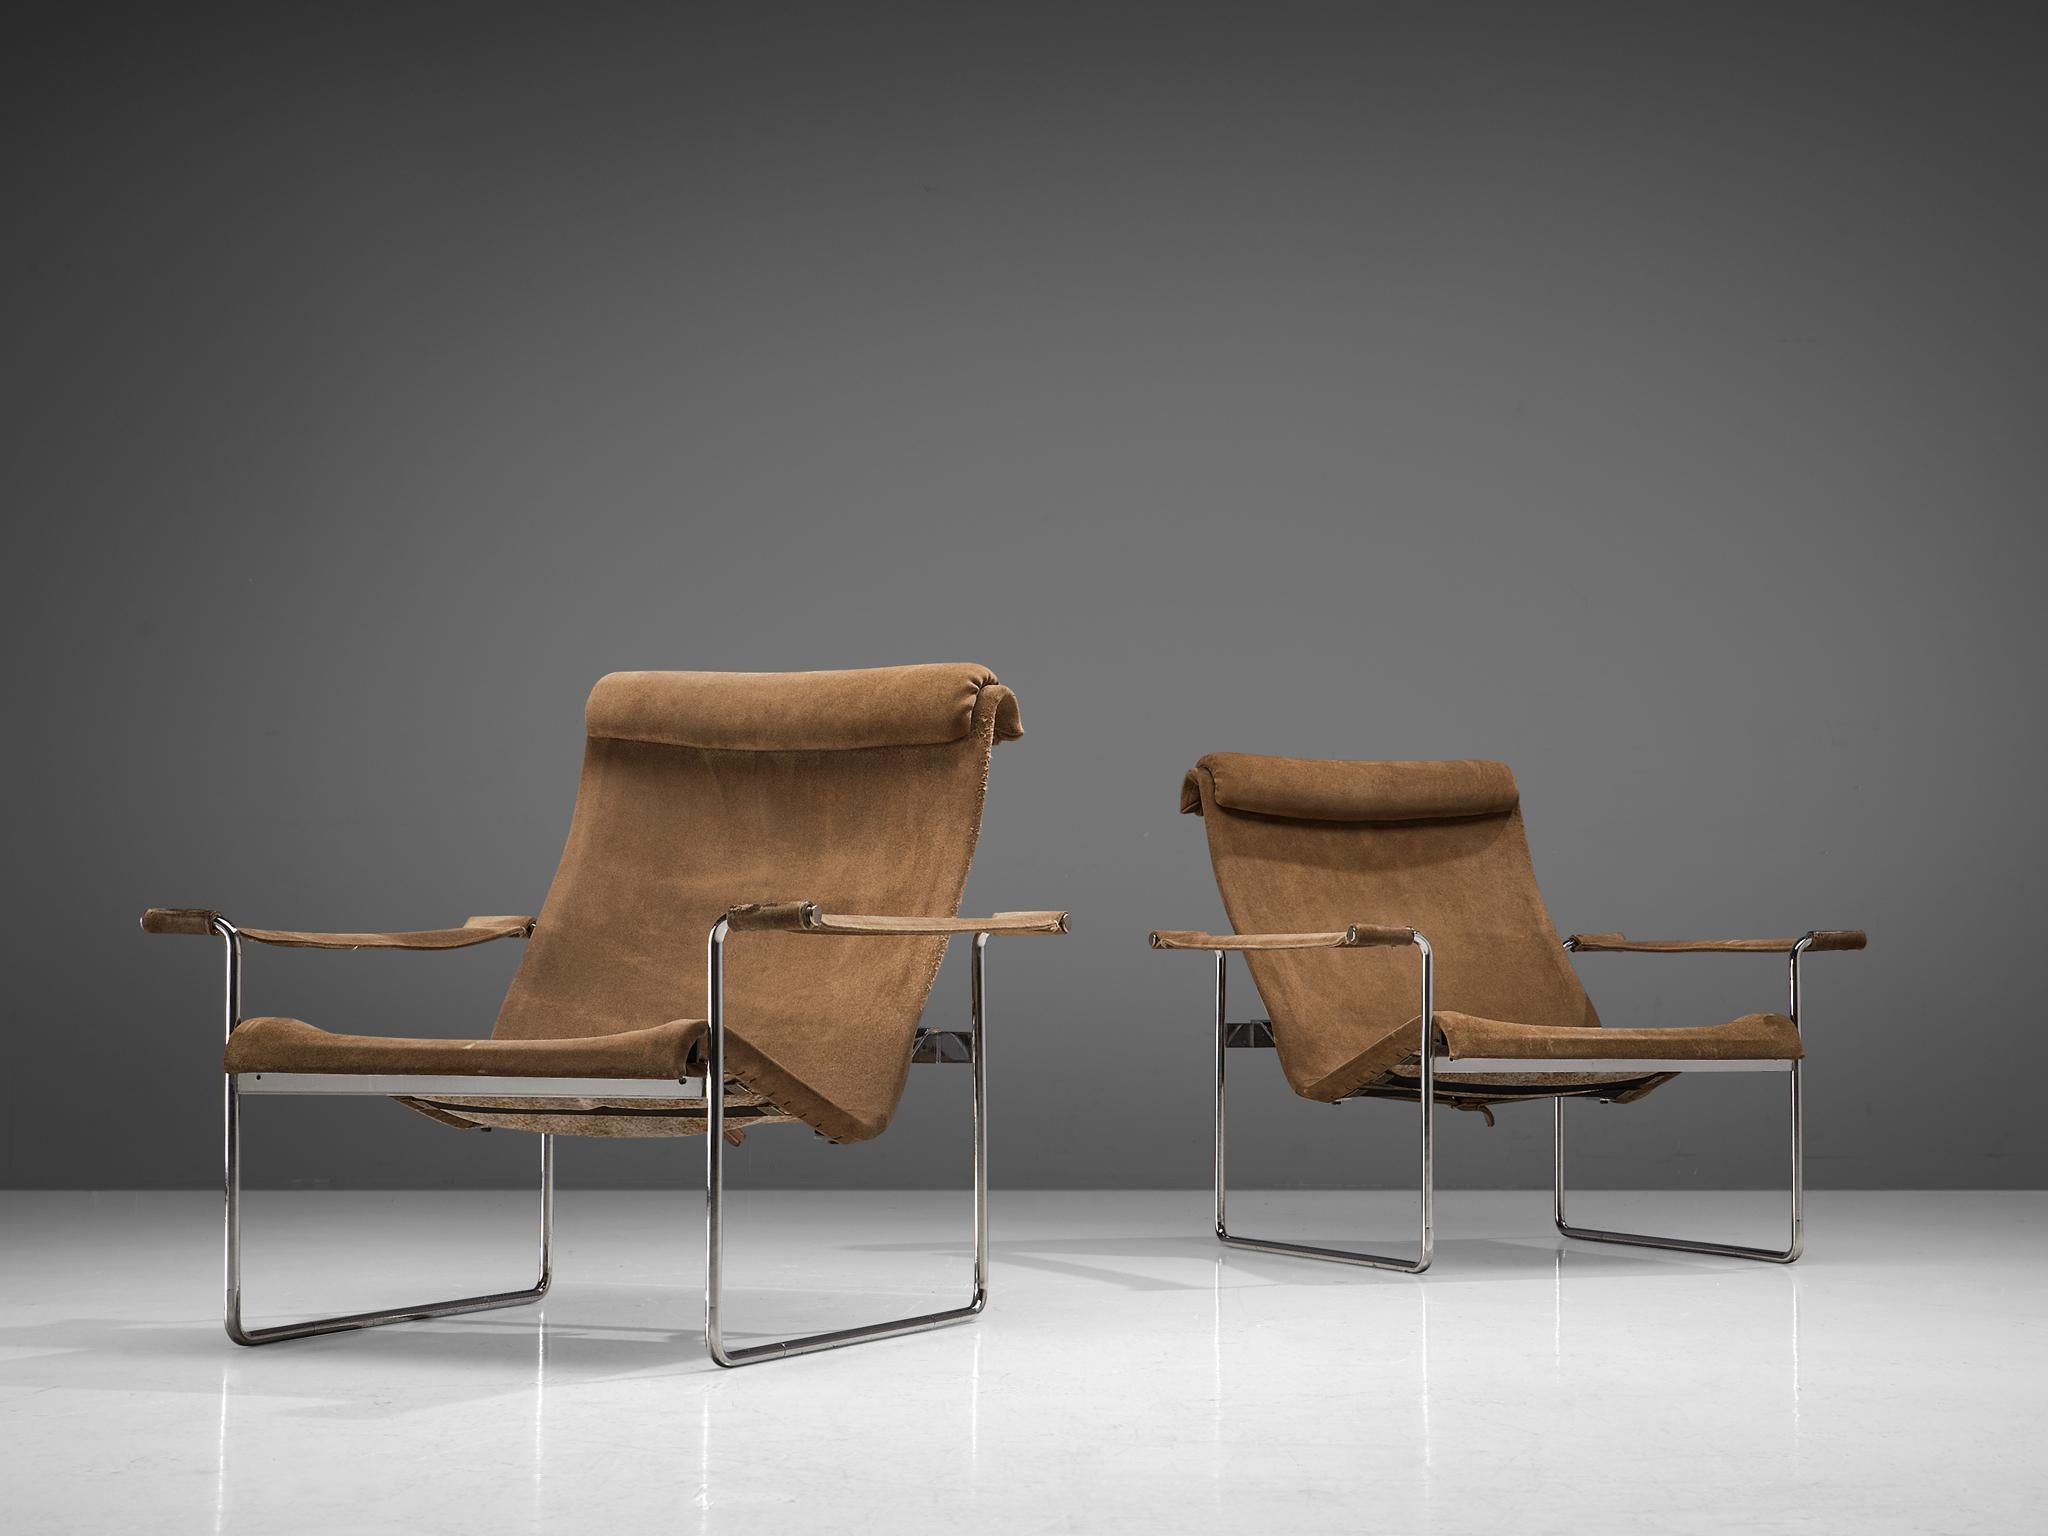 Hans Könecke for Tecta, set of 2 armchairs, suede and metal, Germany, 1960s

This set of lounge chairs is another great example of German Modernist furniture, designed by architect Hans Könecke in the 1960s. This model features a high back, in